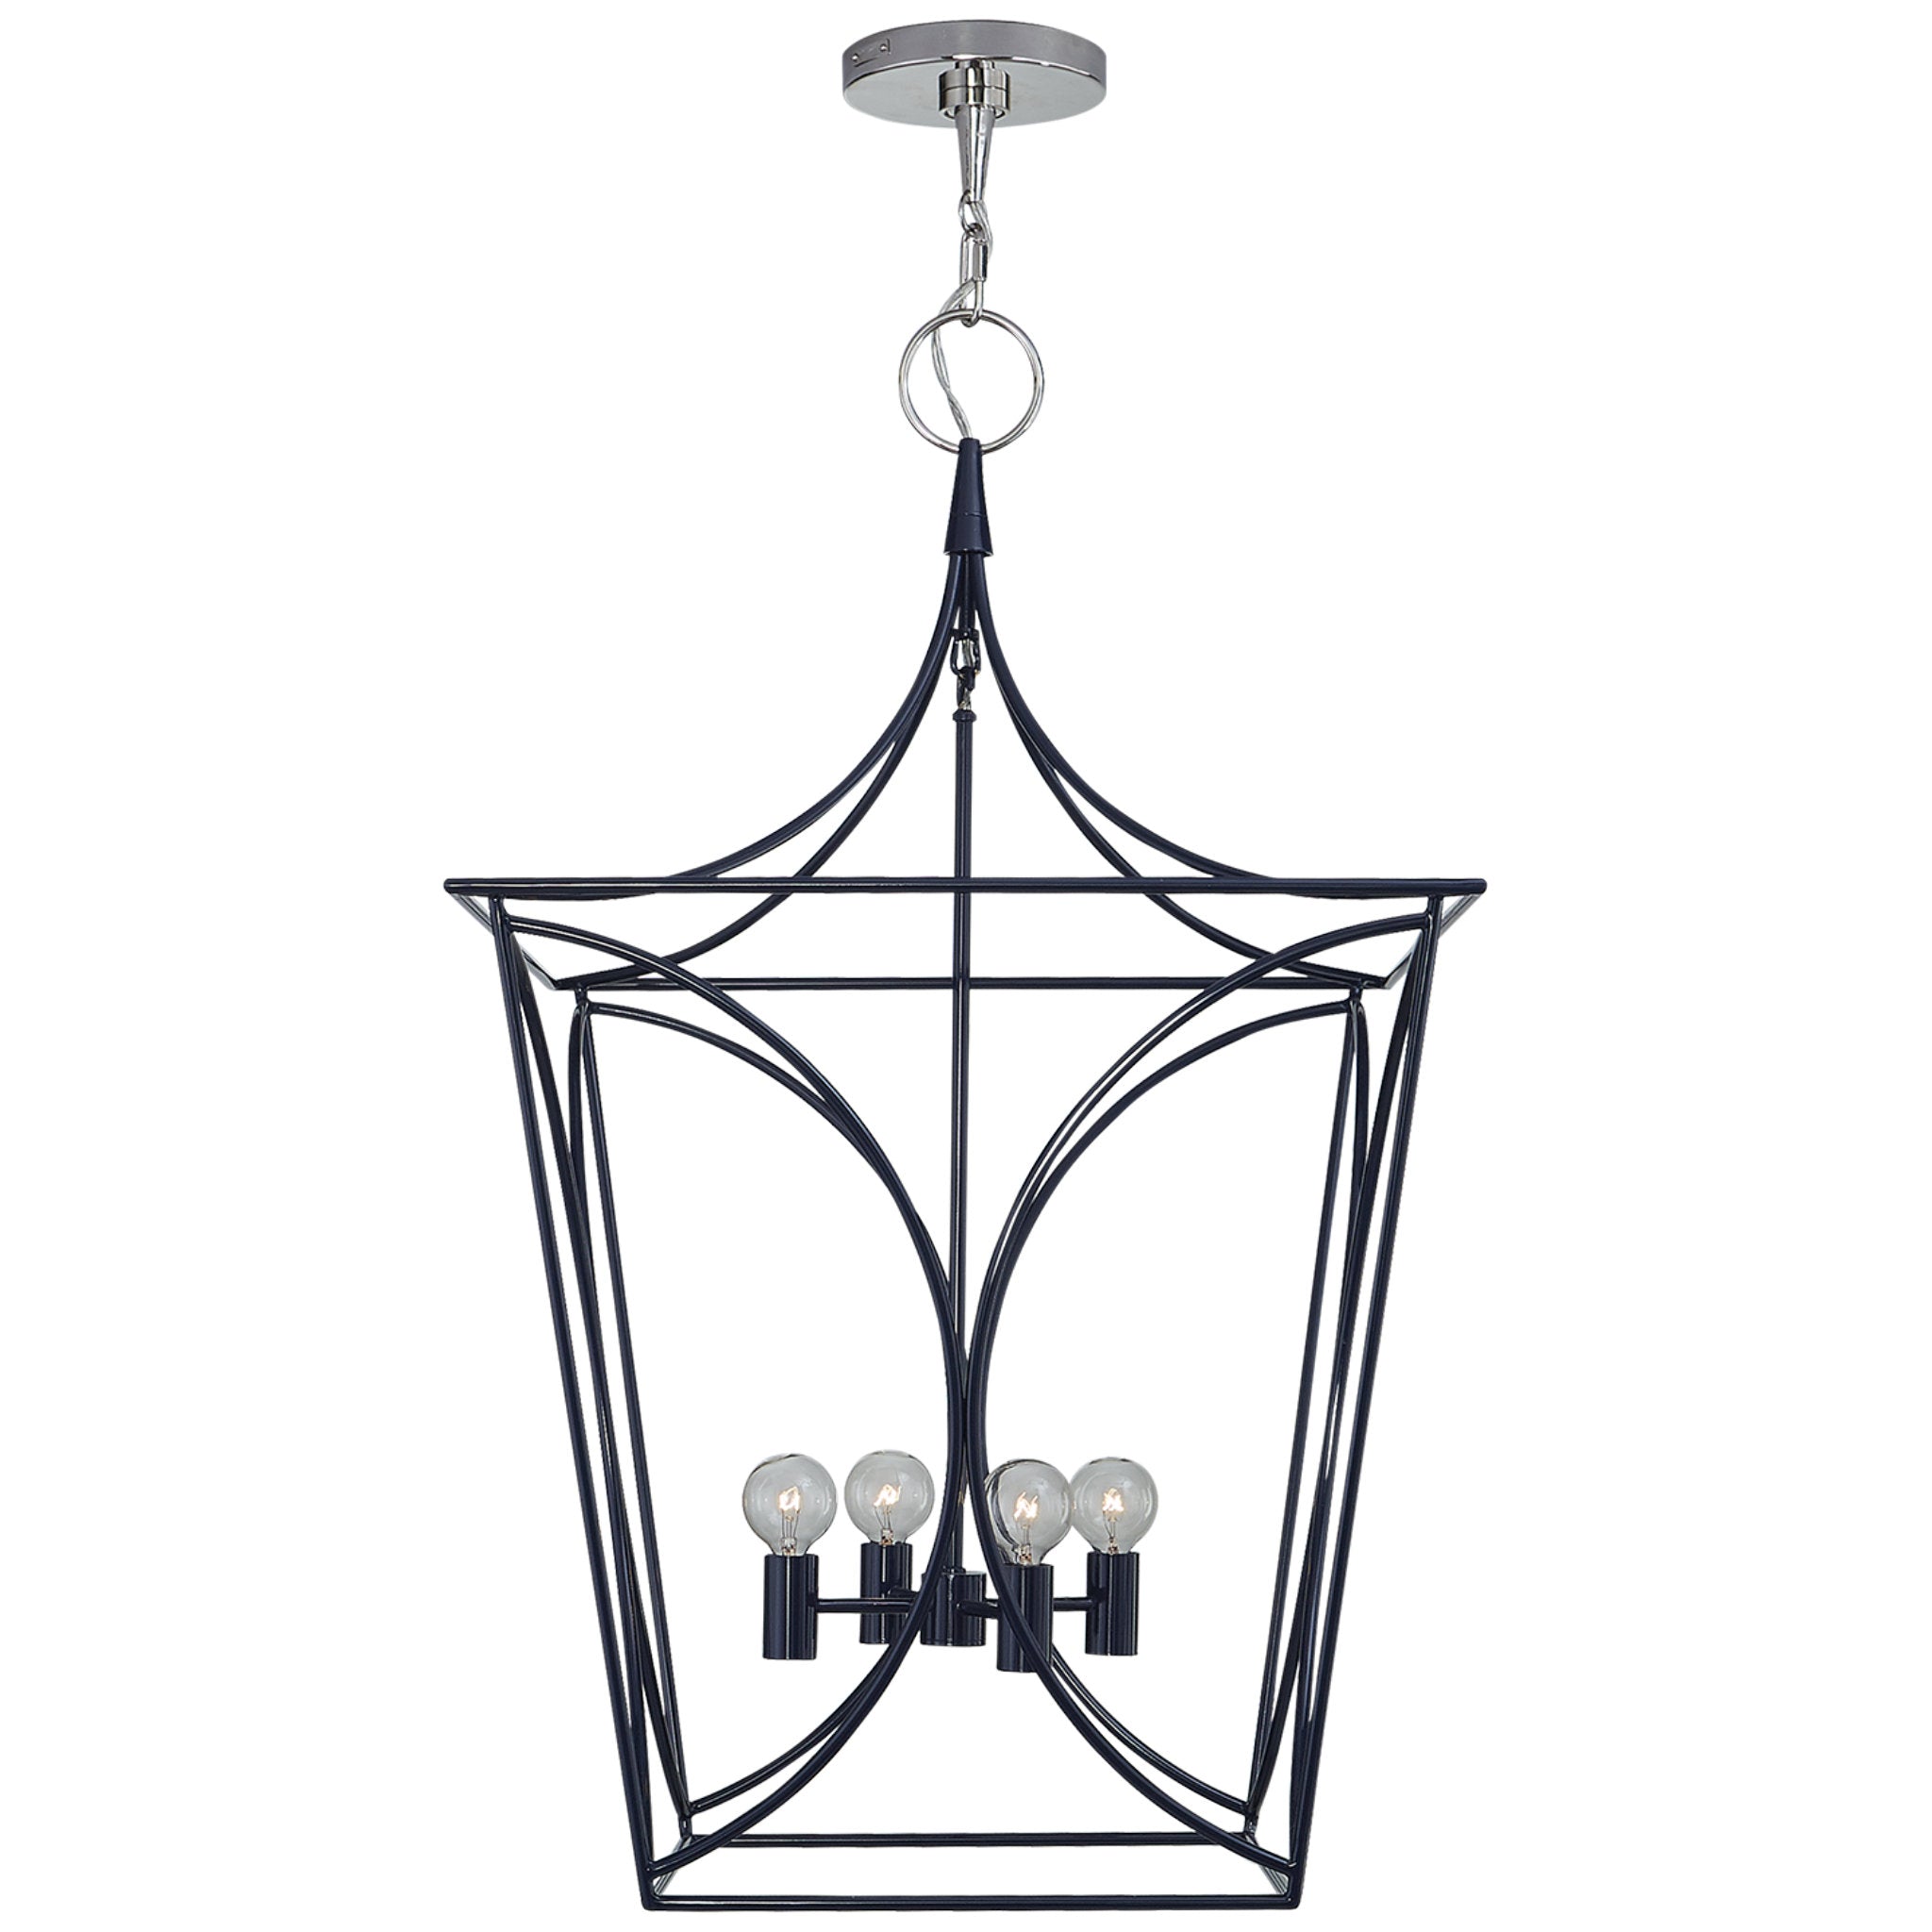 kate spade new york Cavanagh Medium Lantern in French Navy and Polished Nickel